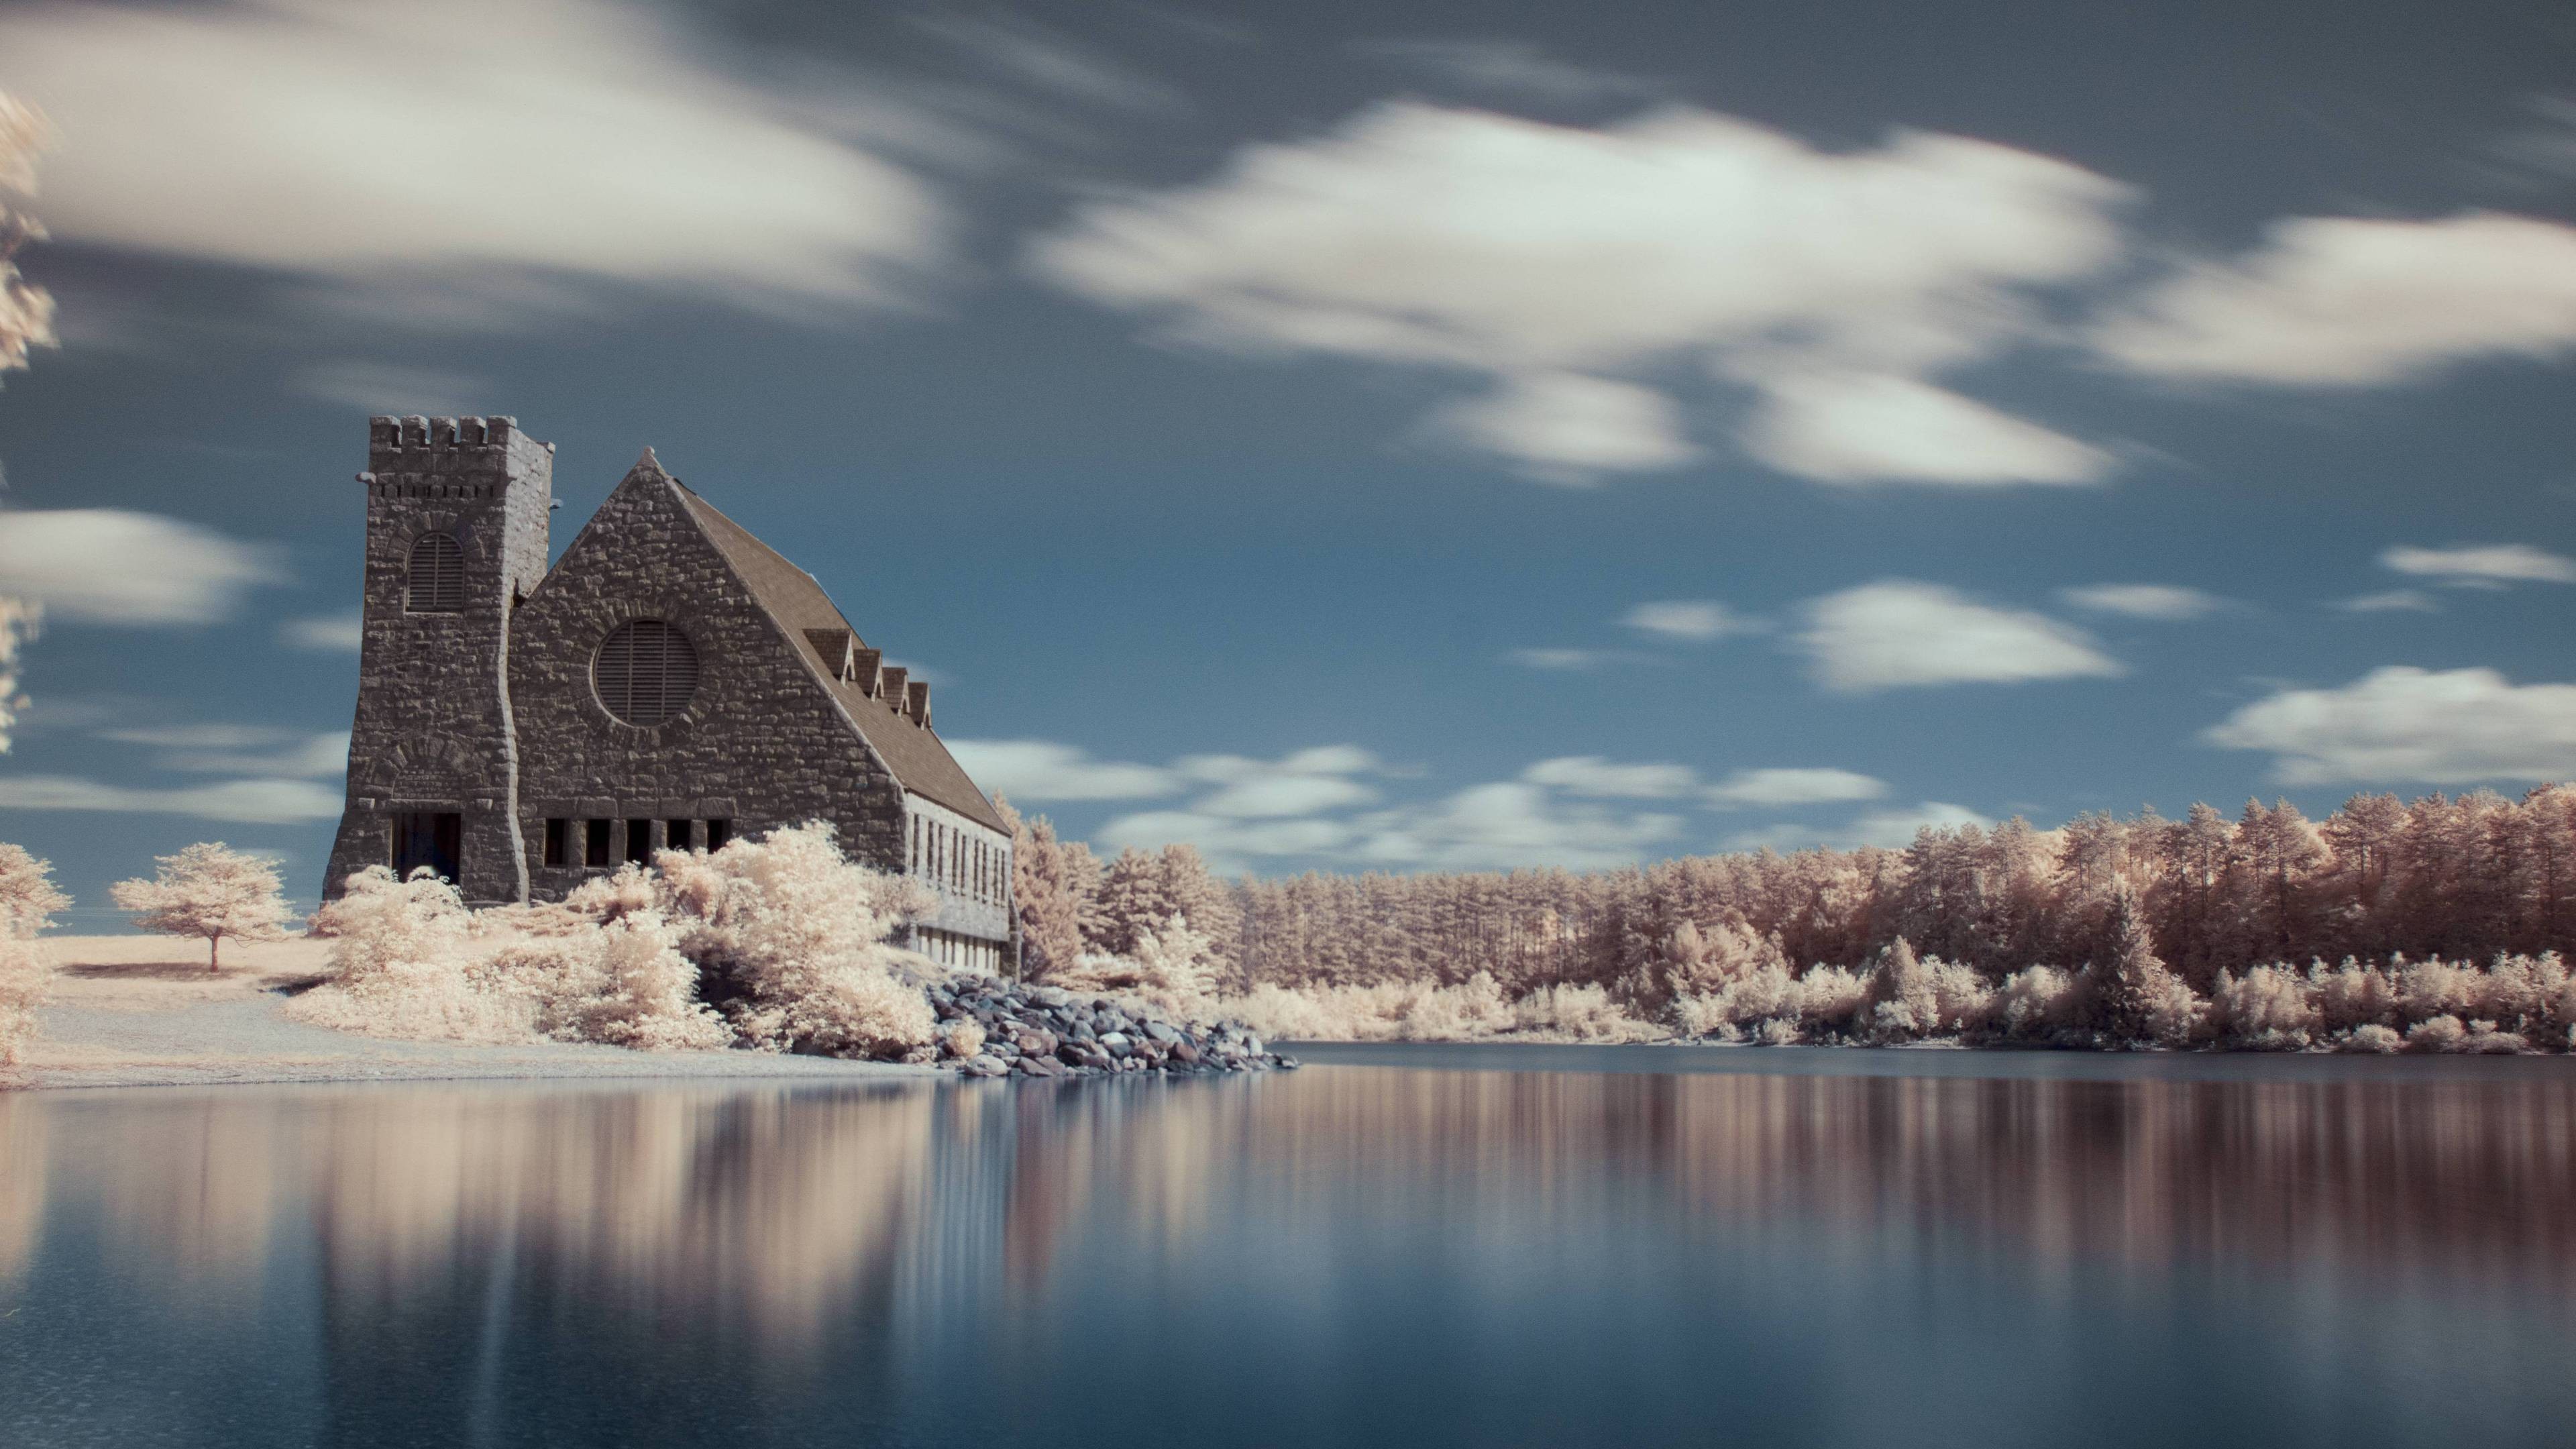 General 3840x2160 lake mansions house old building building white clouds long exposure sky snow forest calm water architecture surreal